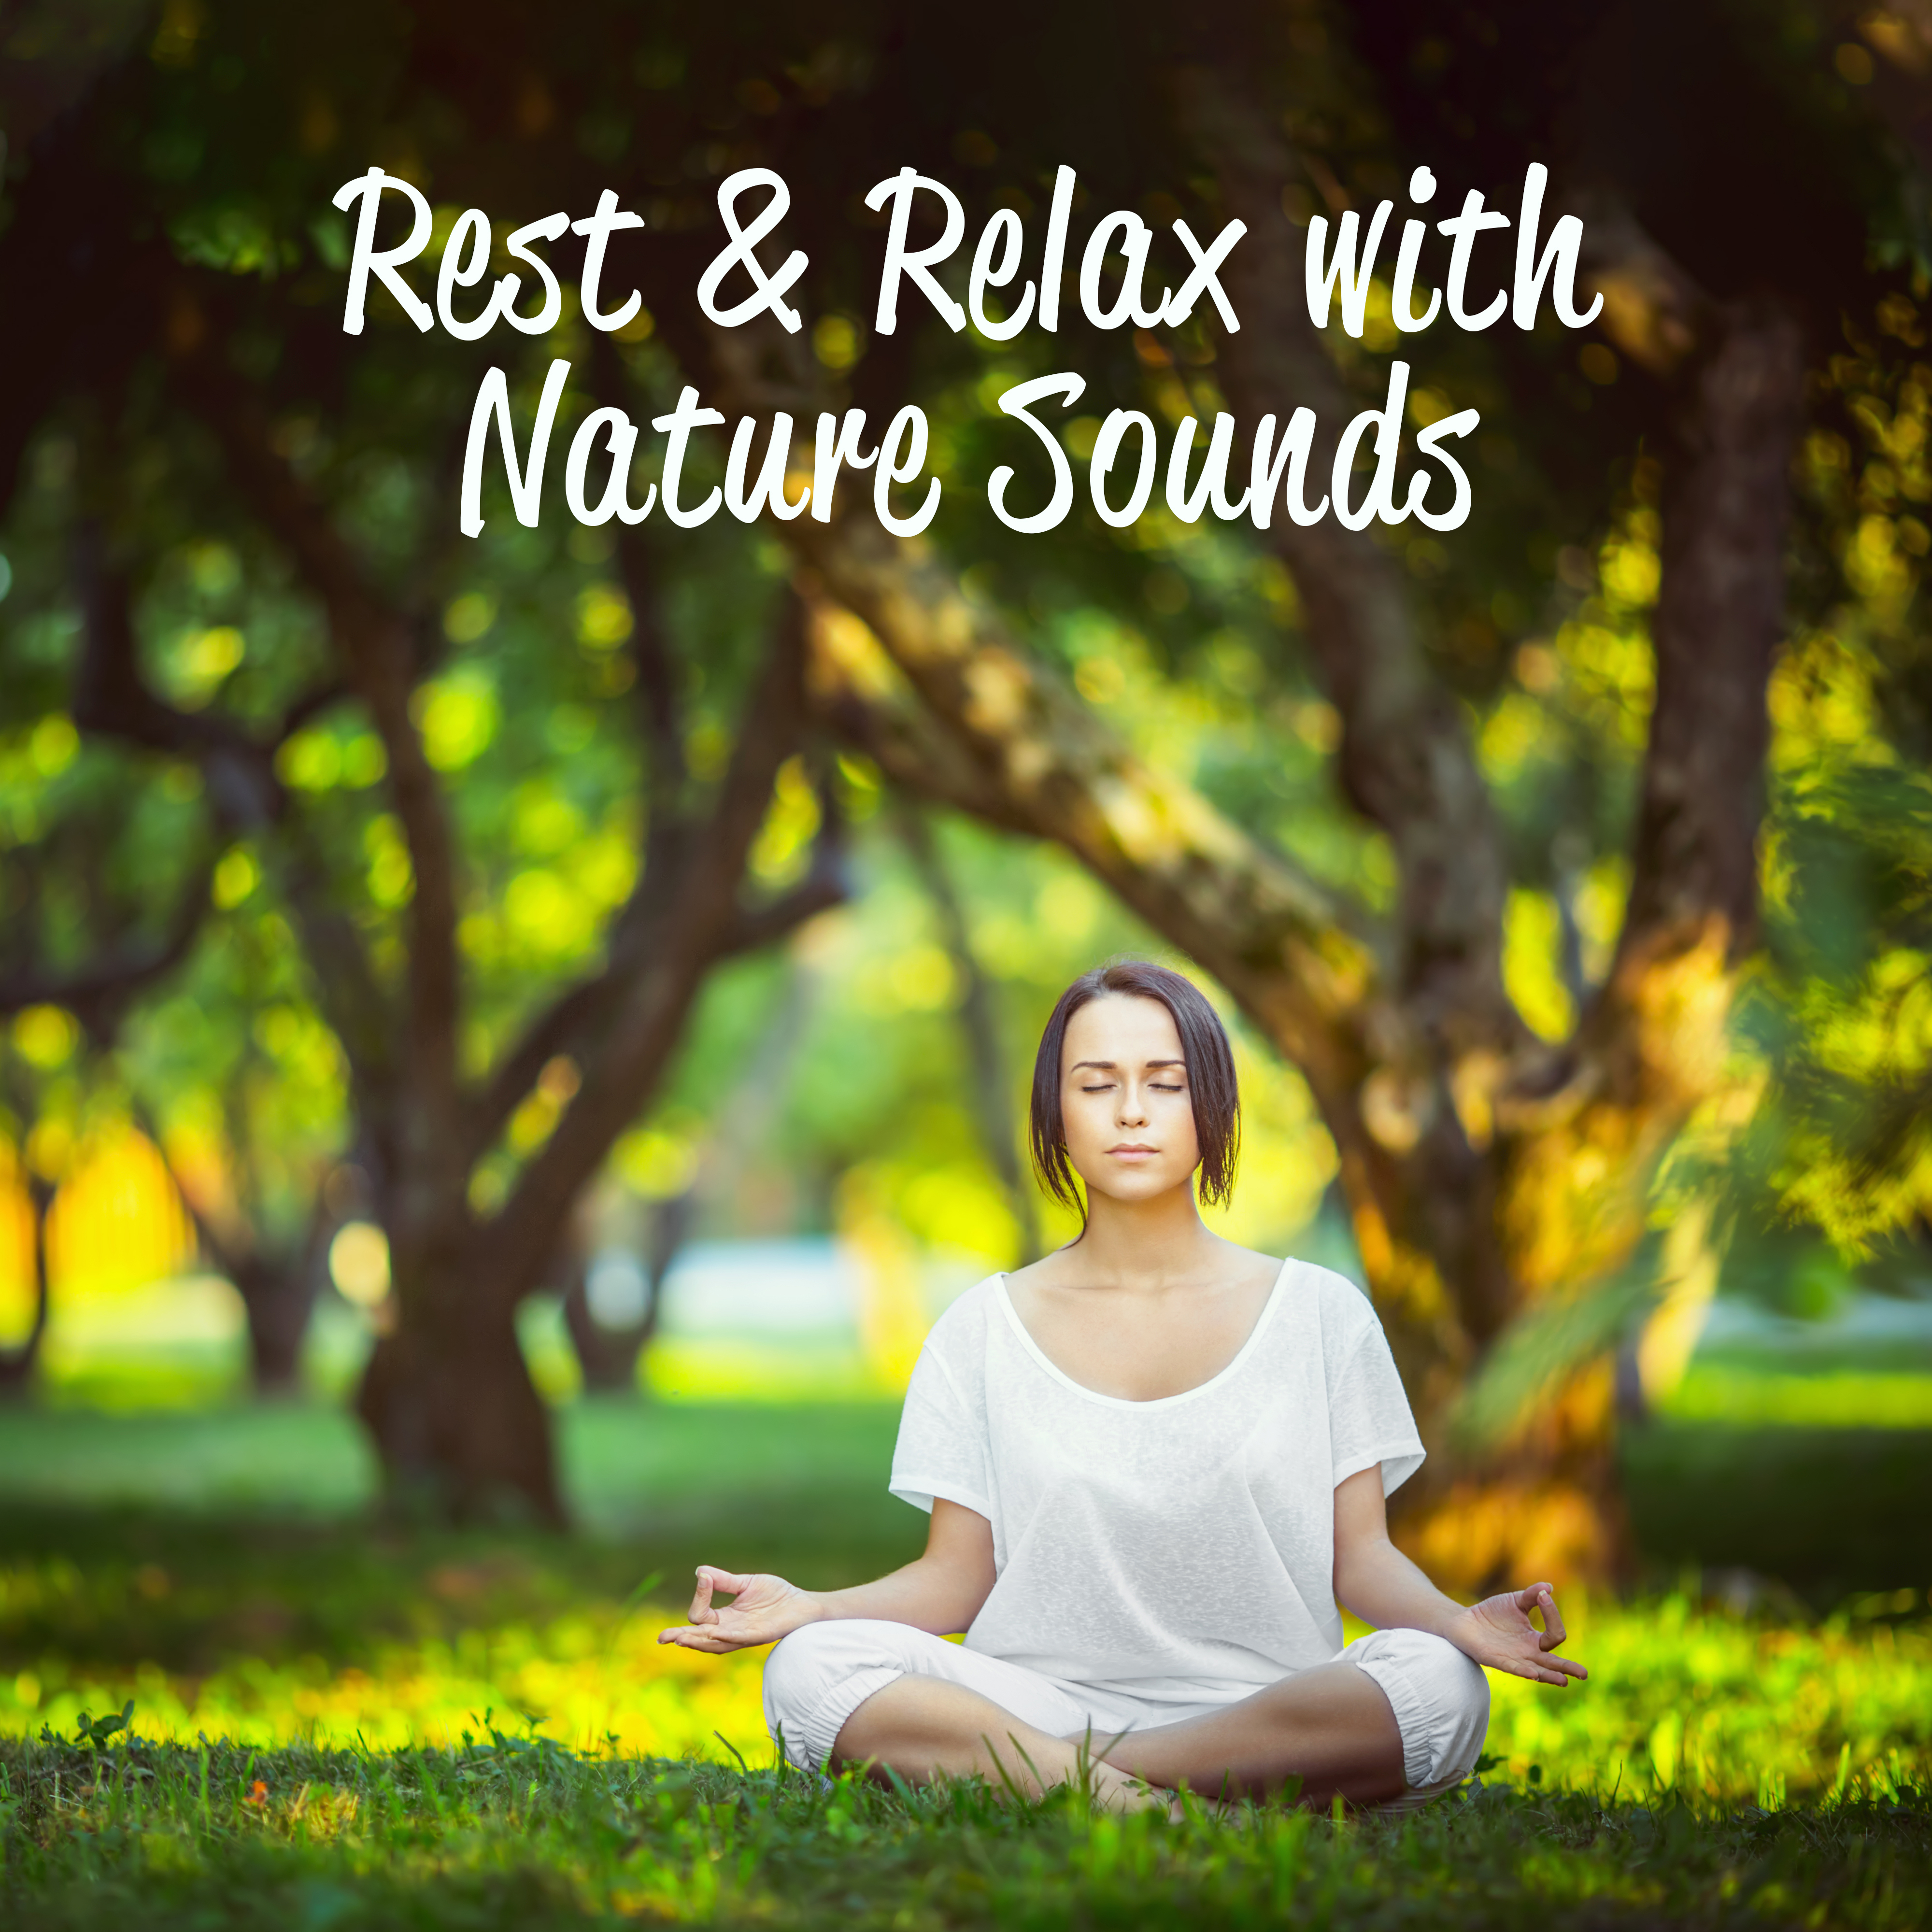 Rest & Relax with Nature Sounds – New Age Nature Music Perfect for Meditation, Yoga Training & Relaxing